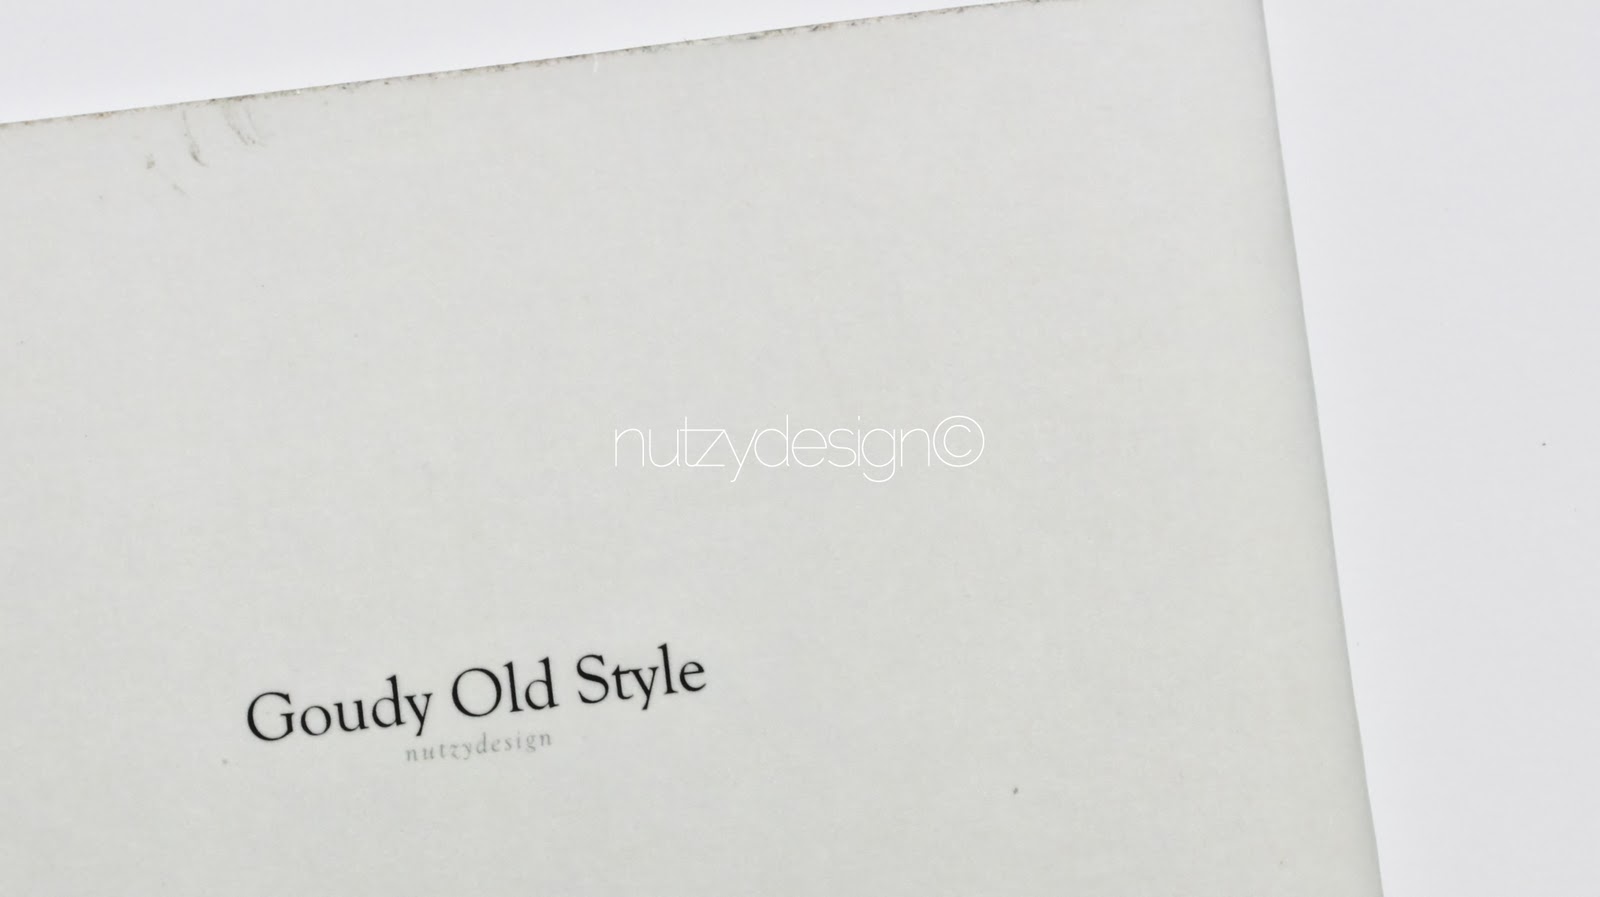 nutzydesign: Goudy Old Style Typography Book